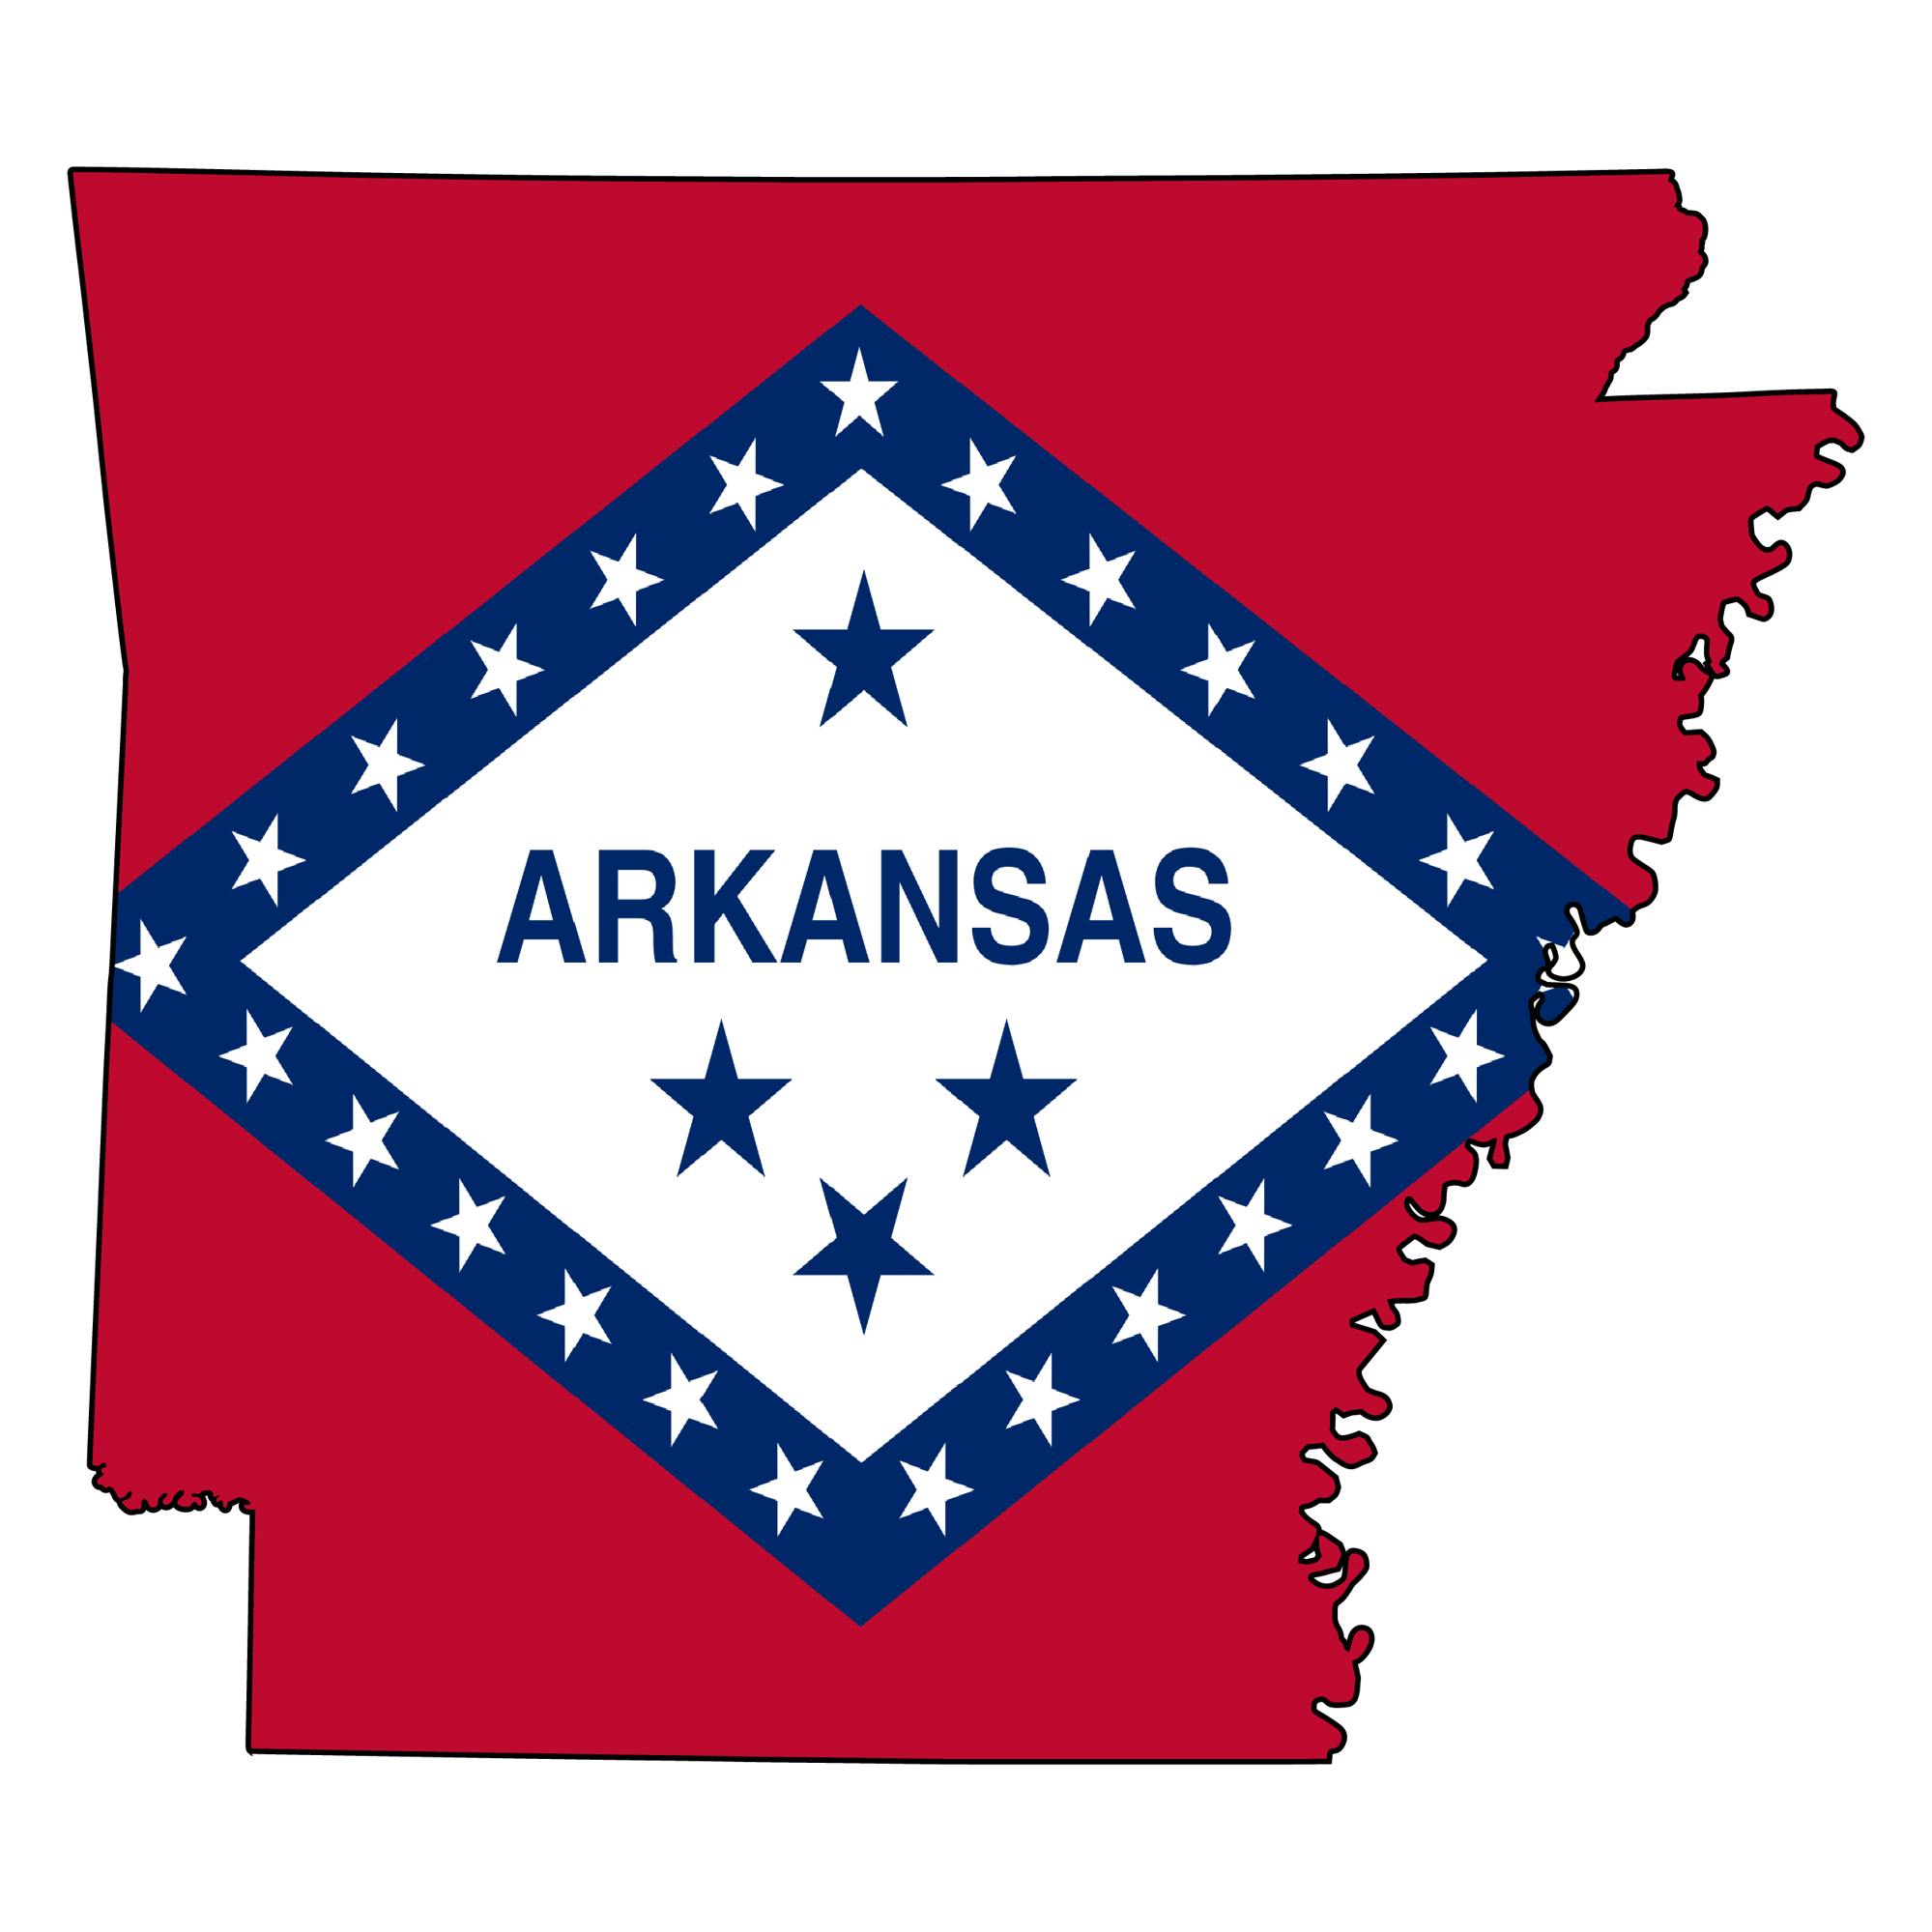 The state of Arkansas